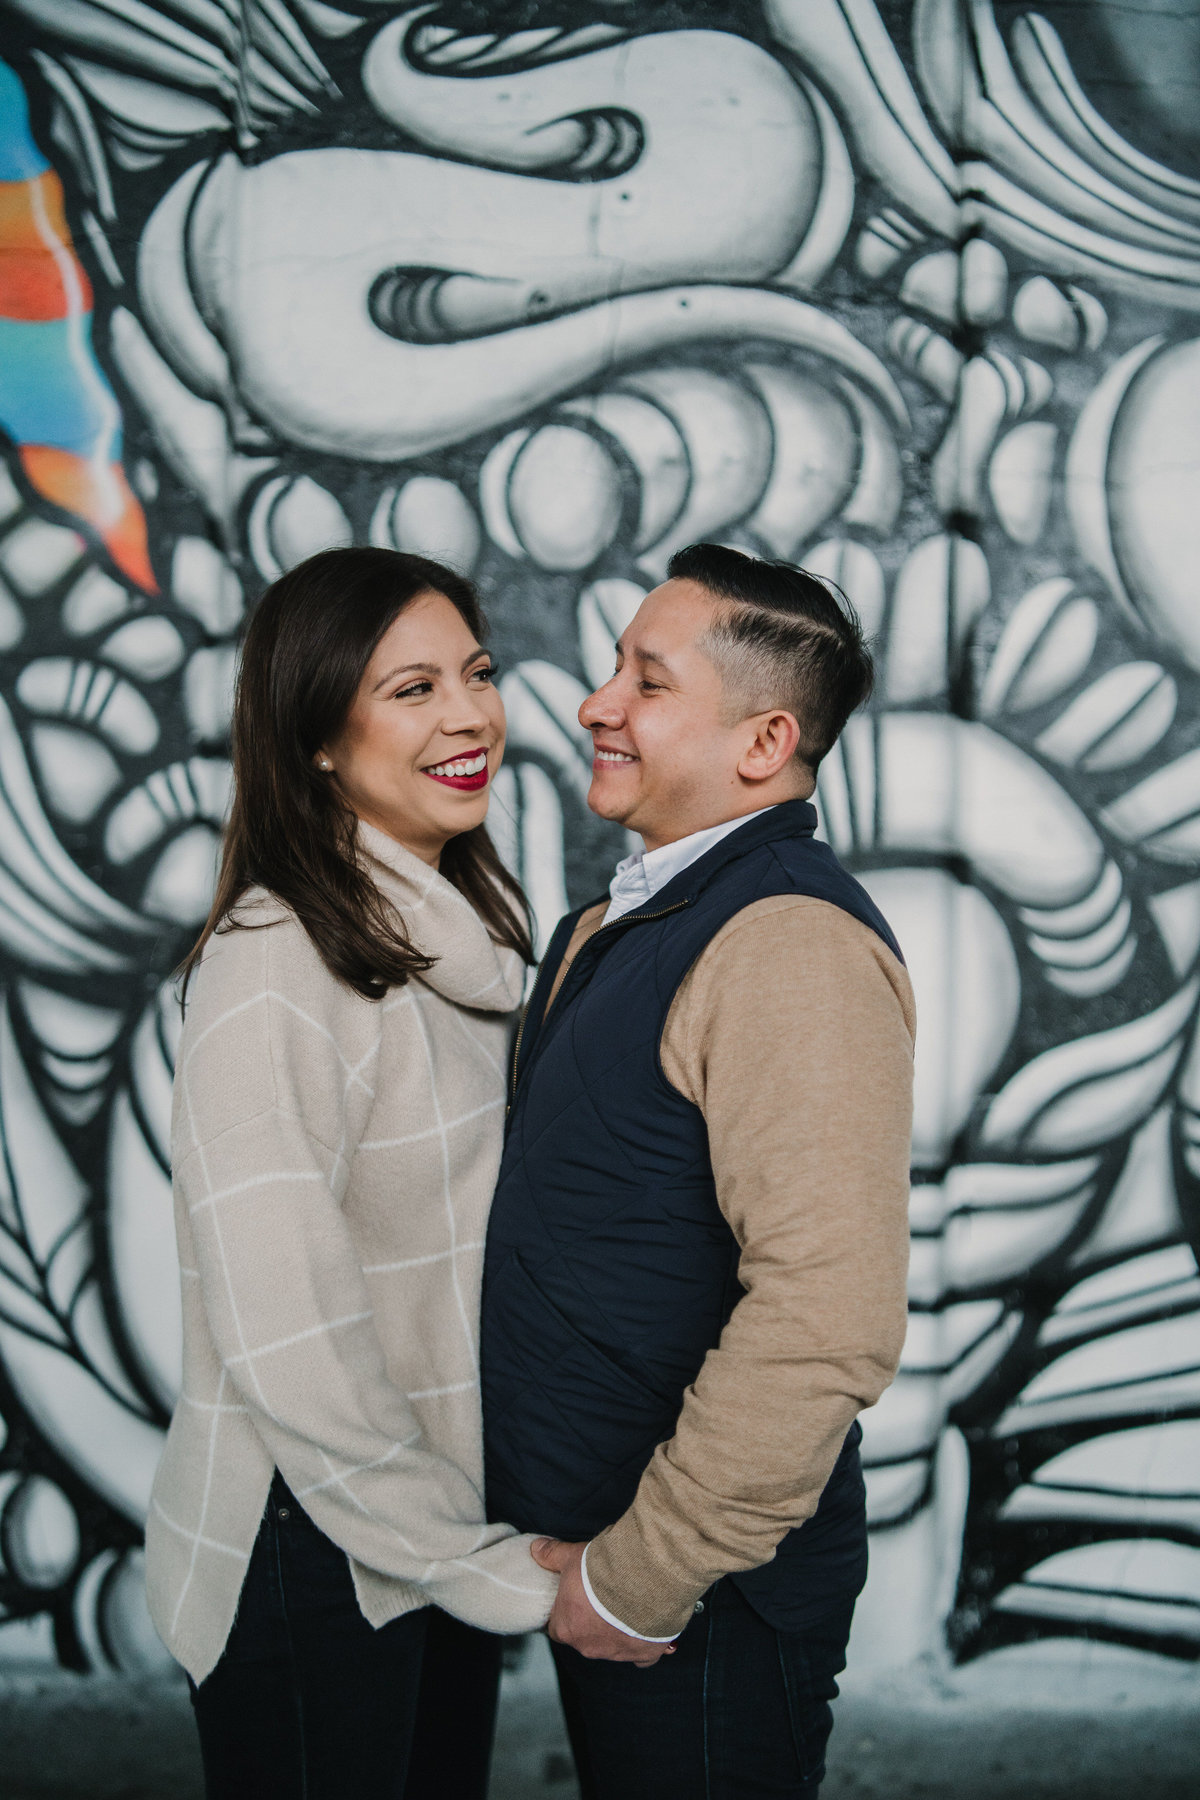 Couple's holiday portrait session downtown San Antonio taken by Expose The Heart Photography